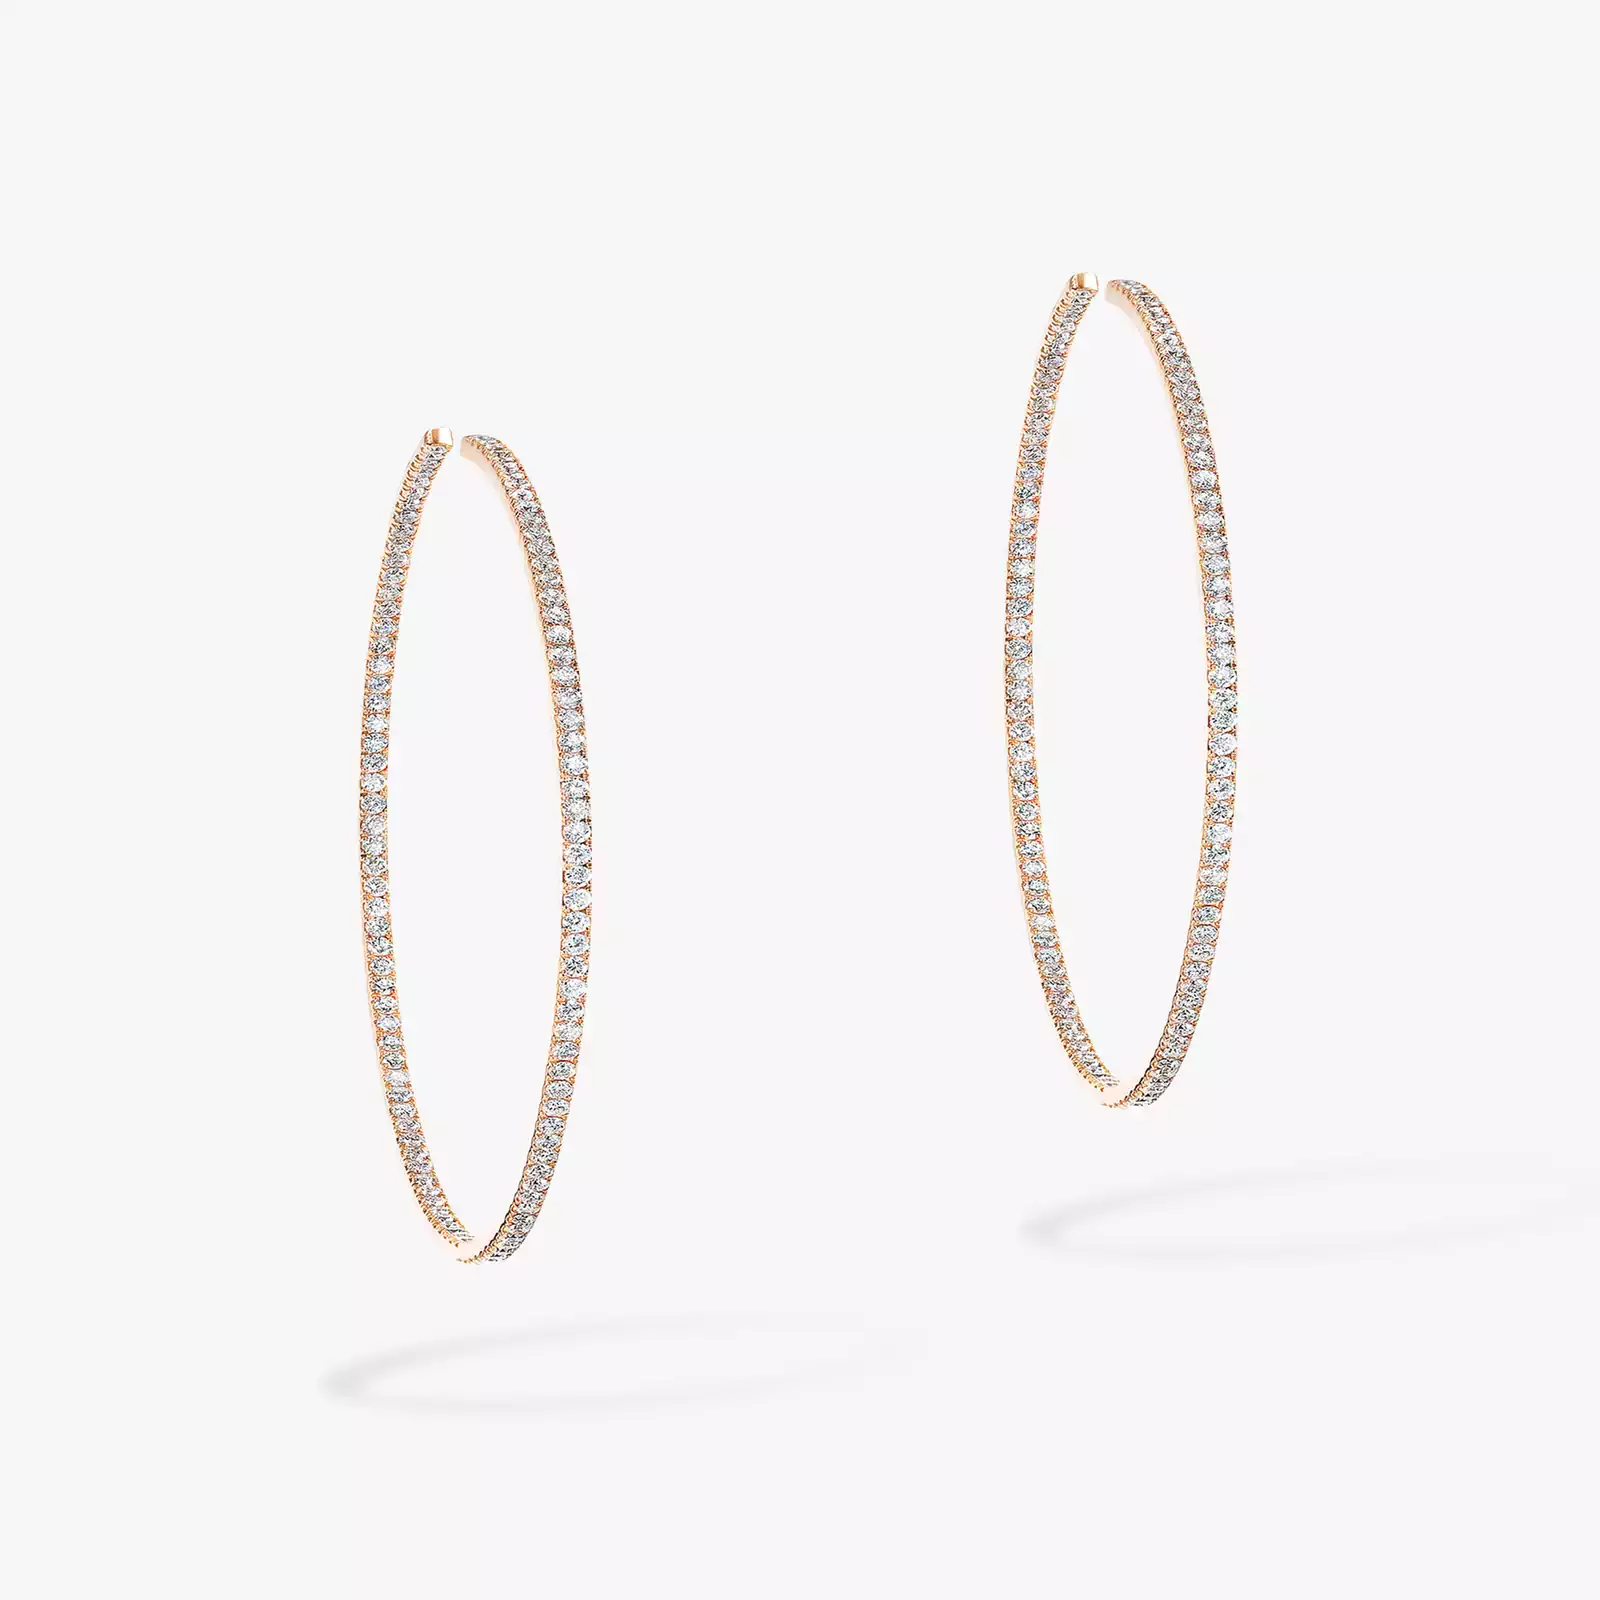 Earrings For Her Pink Gold Diamond Gatsby Small Hoop 04686-PG